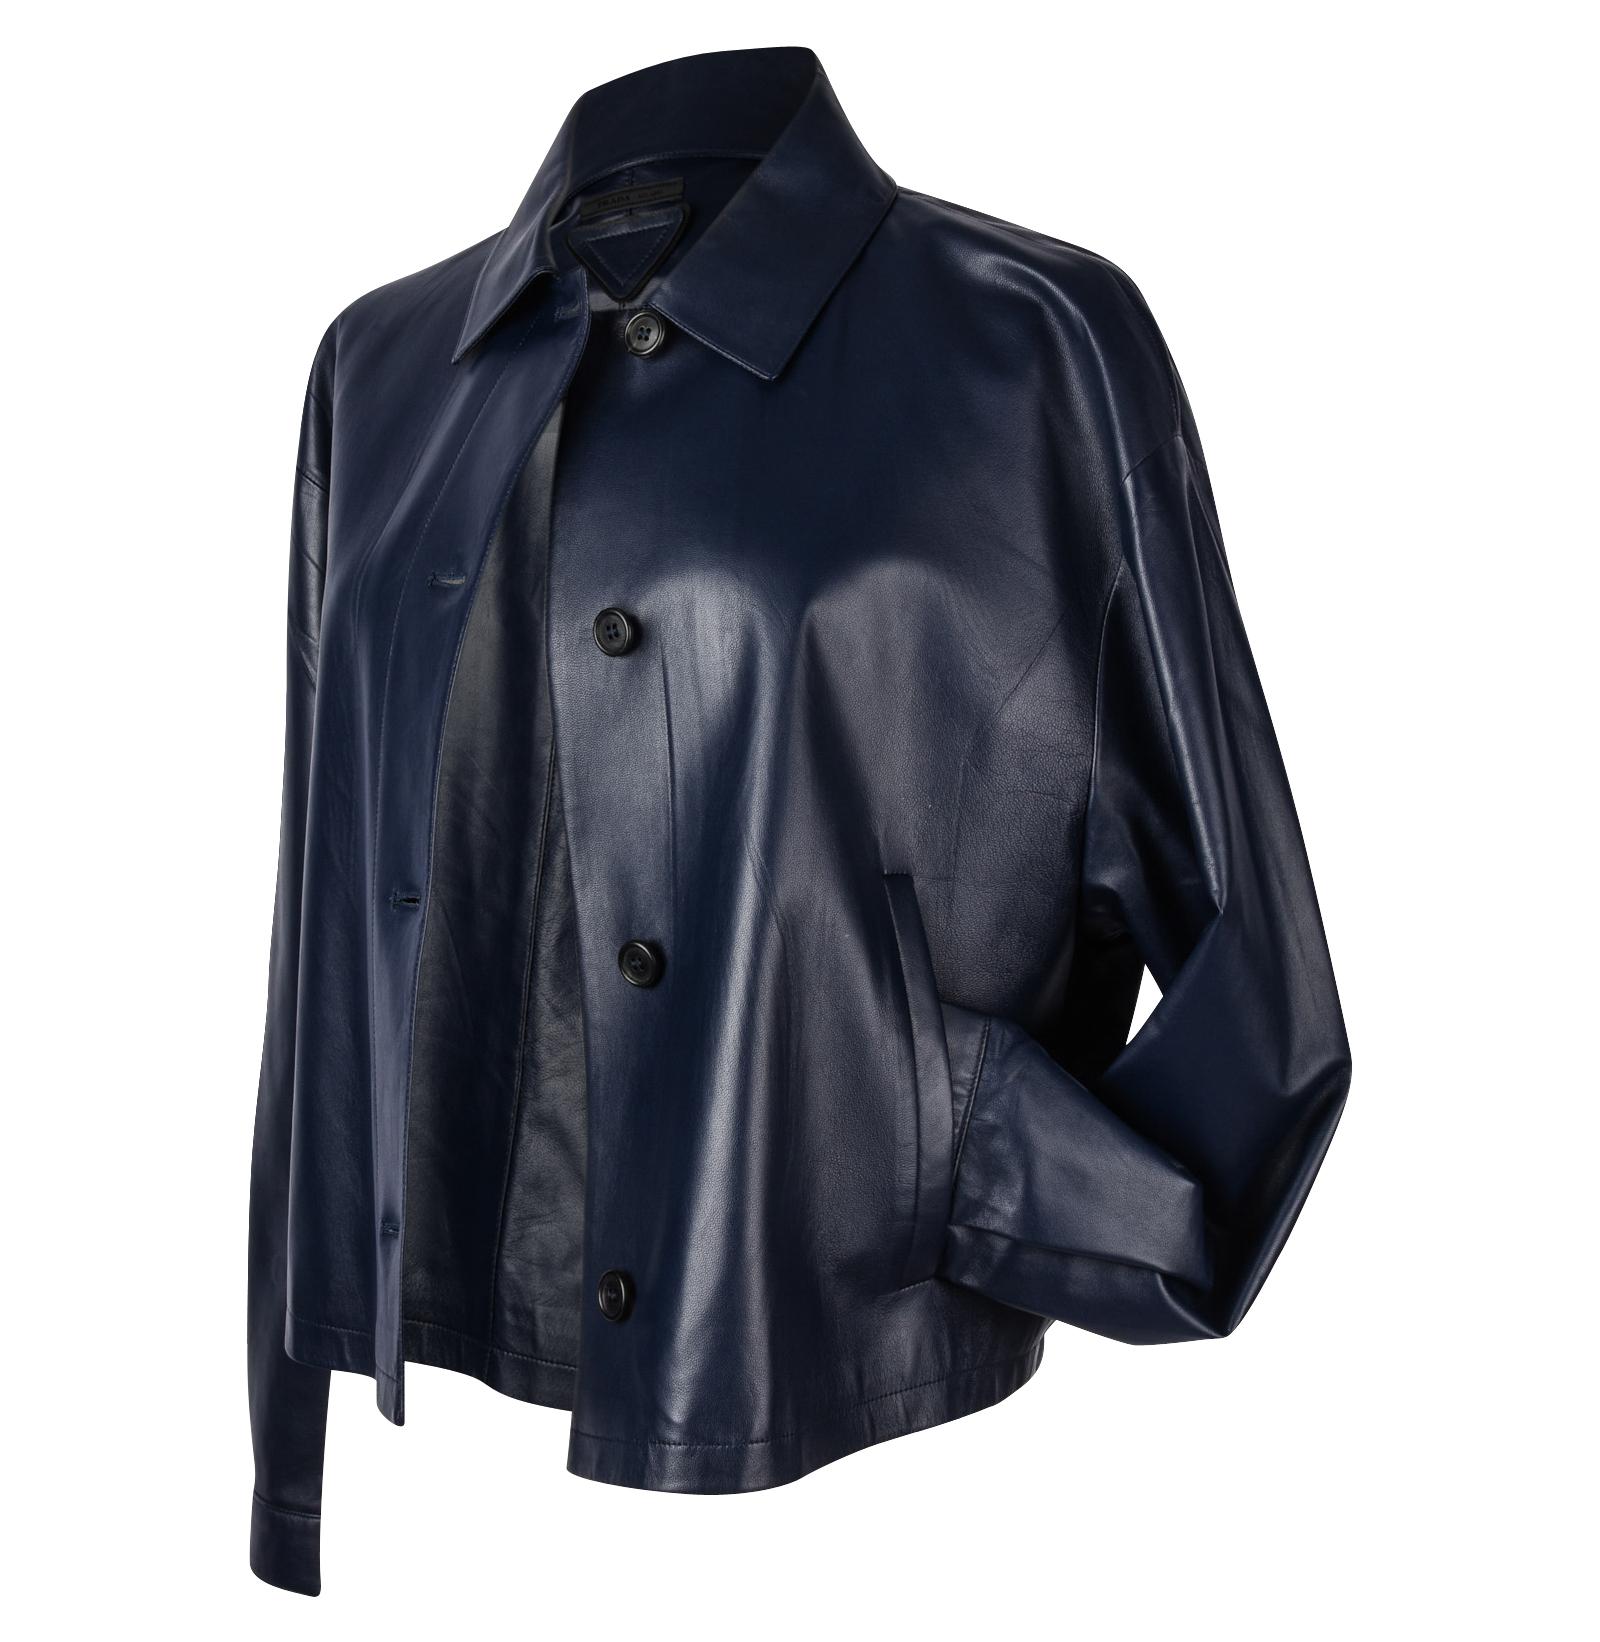 Guaranteed authentic Prada royal navy blue lambskin feather light jacket.  
Easy fit drop shoulder 4 button single breast.
Classic collar.
Cuffs with a button. 
2 faux slot pockets.
Rear has Prada triangle leather plaque and black Prada textile